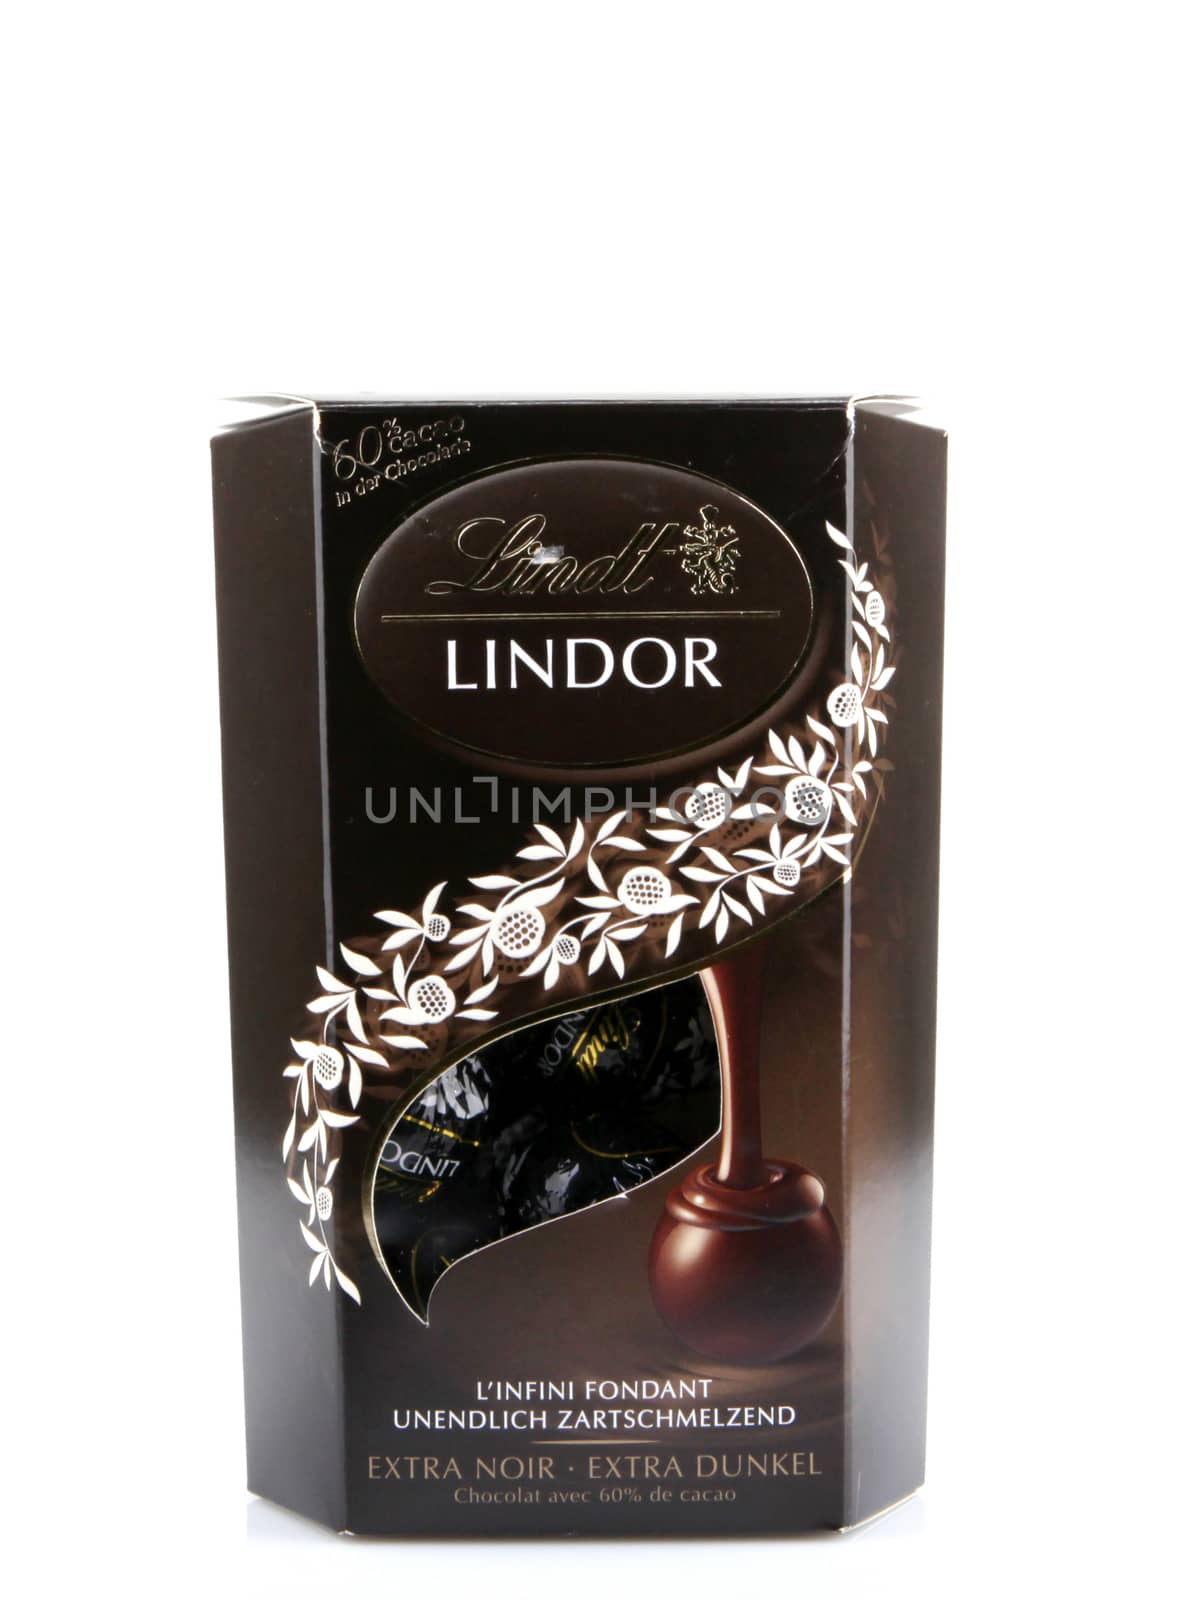 AYTOS, BULGARIA - APRIL 03, 2016: Milk Chocolate LINDOR truffle. Lindt is recognized as a leader in the market for premium quality chocolate.